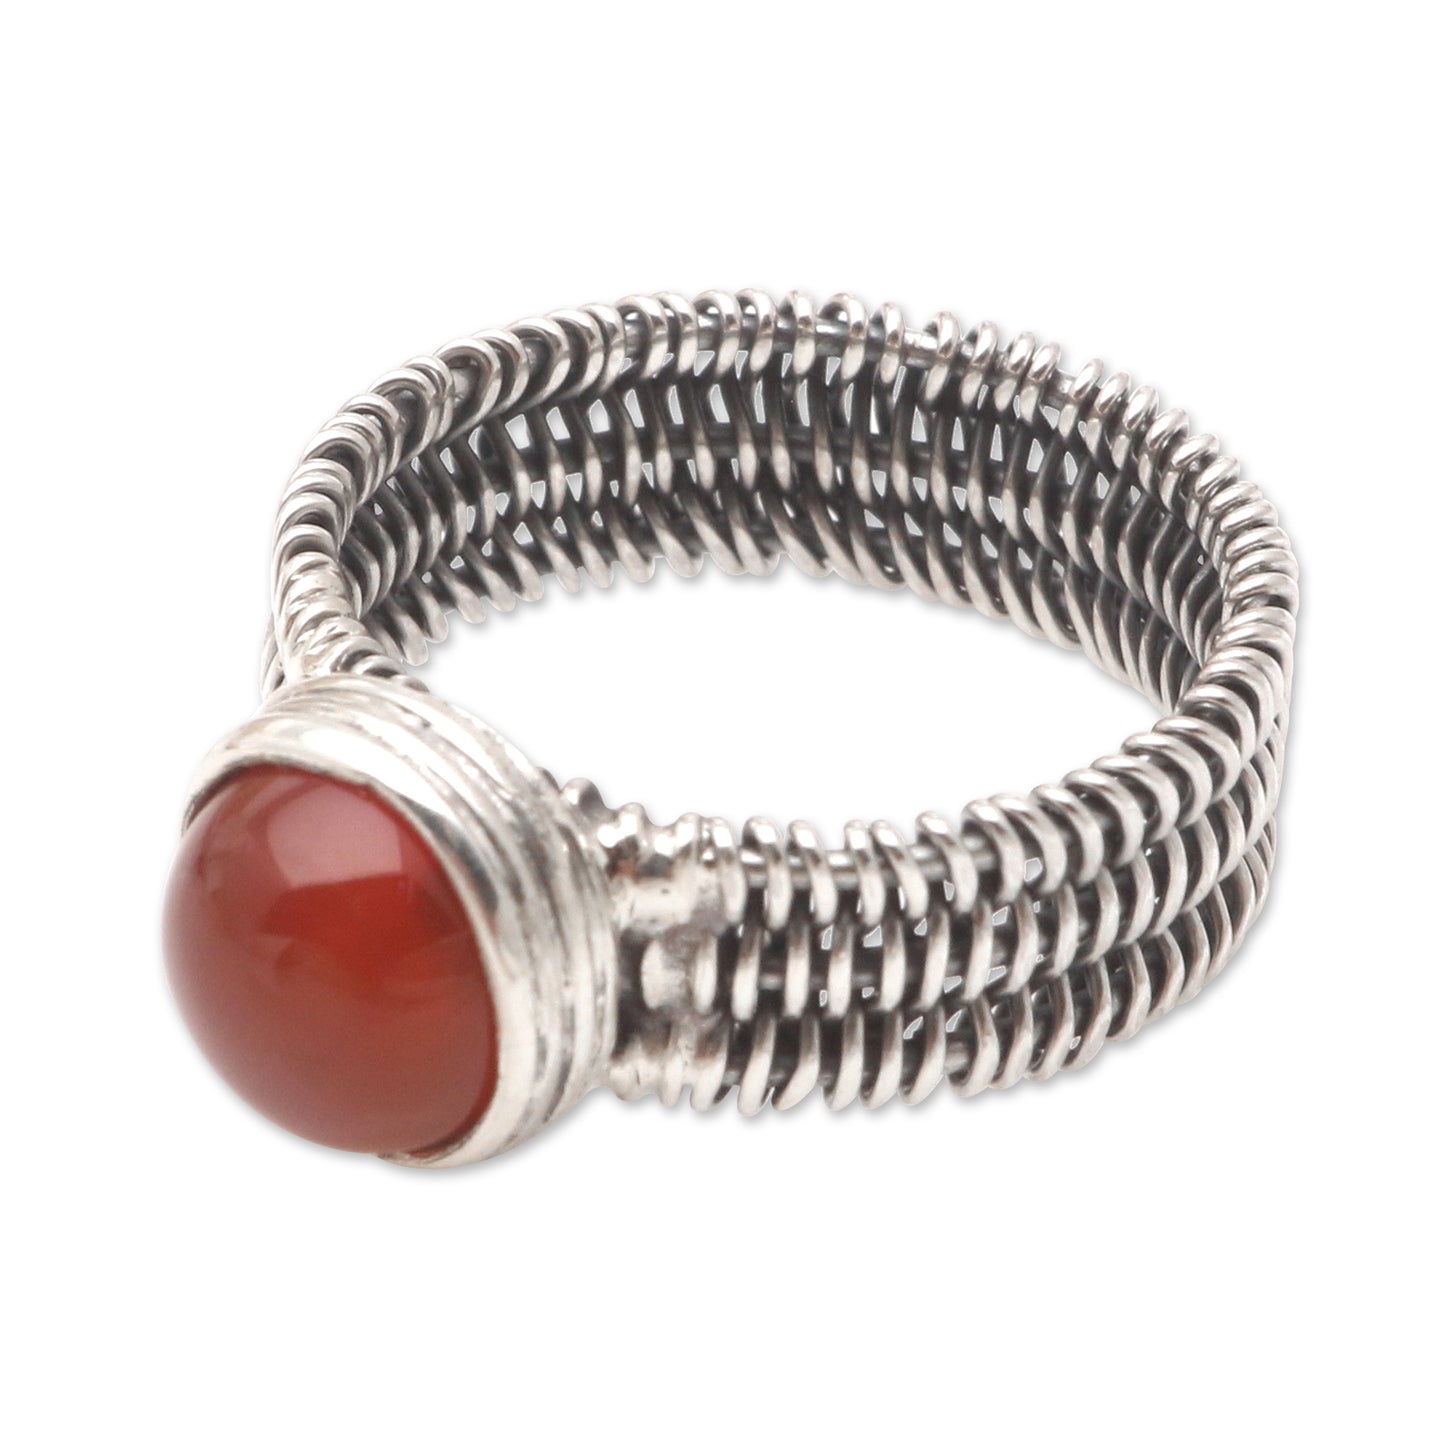 Wrapped Up in Orange Wire Wrapped Sterling Silver Carnelian Ring